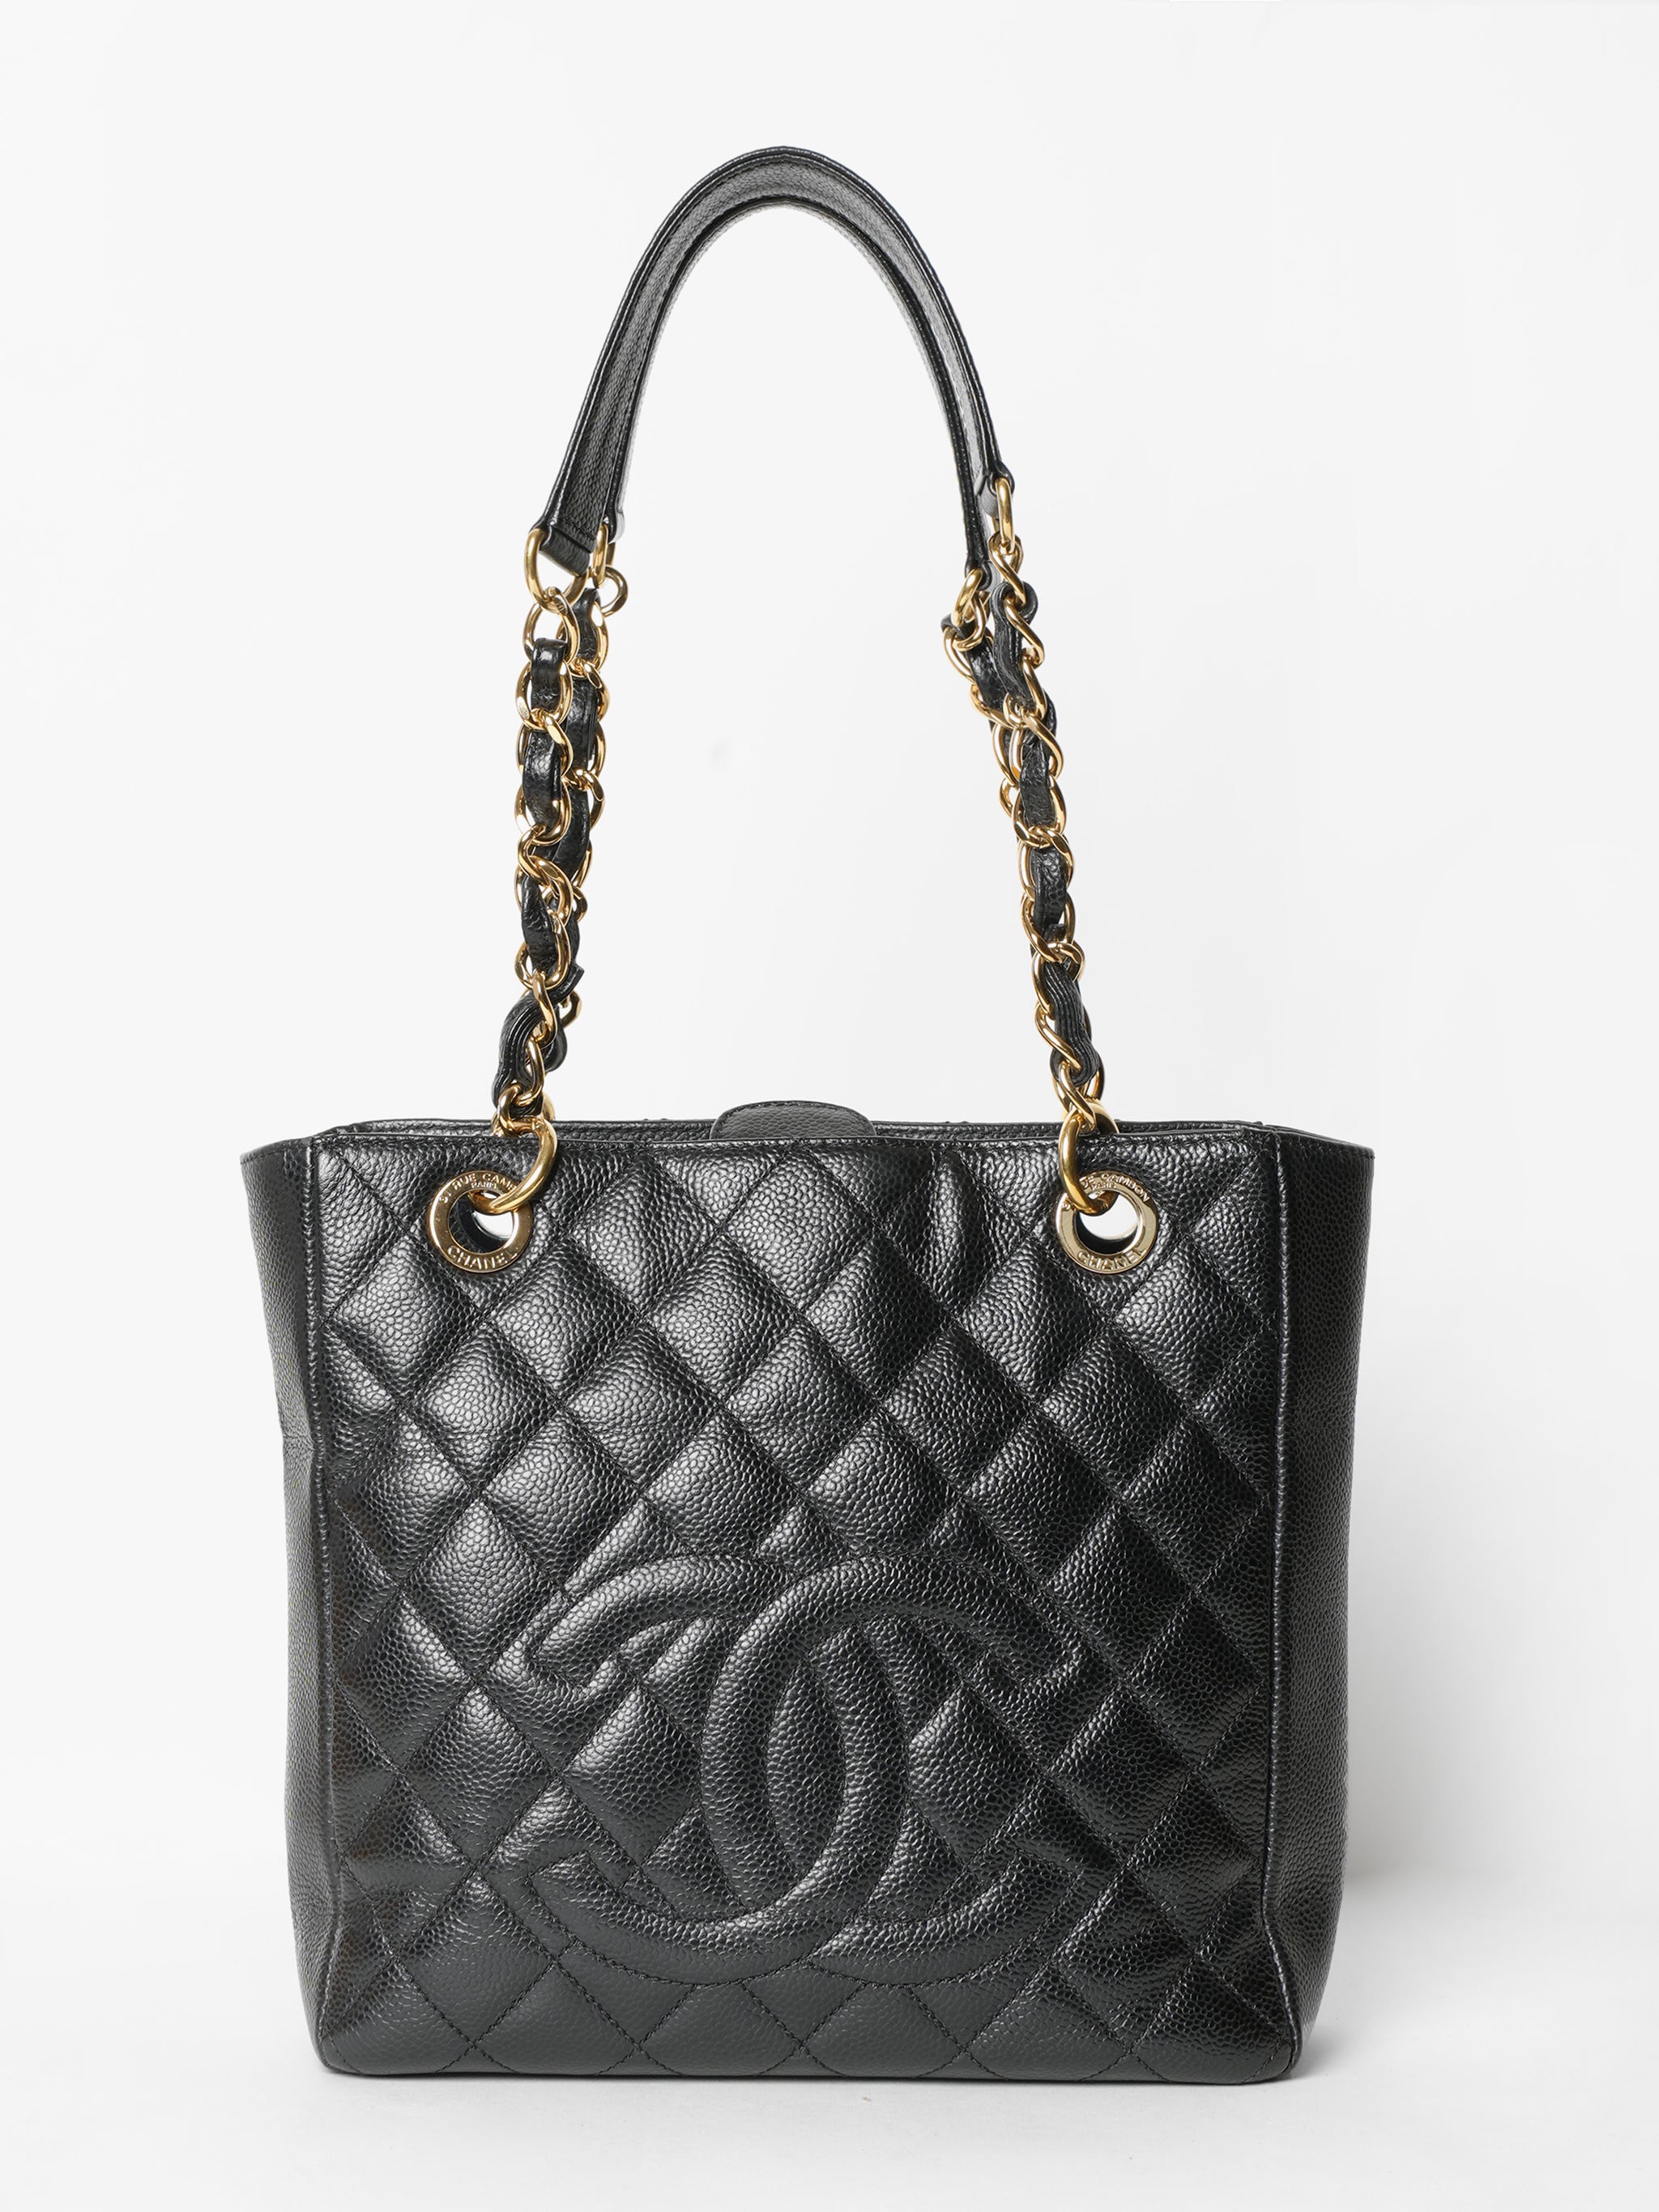 CHANEL Patent Leather Tote Bags for Women